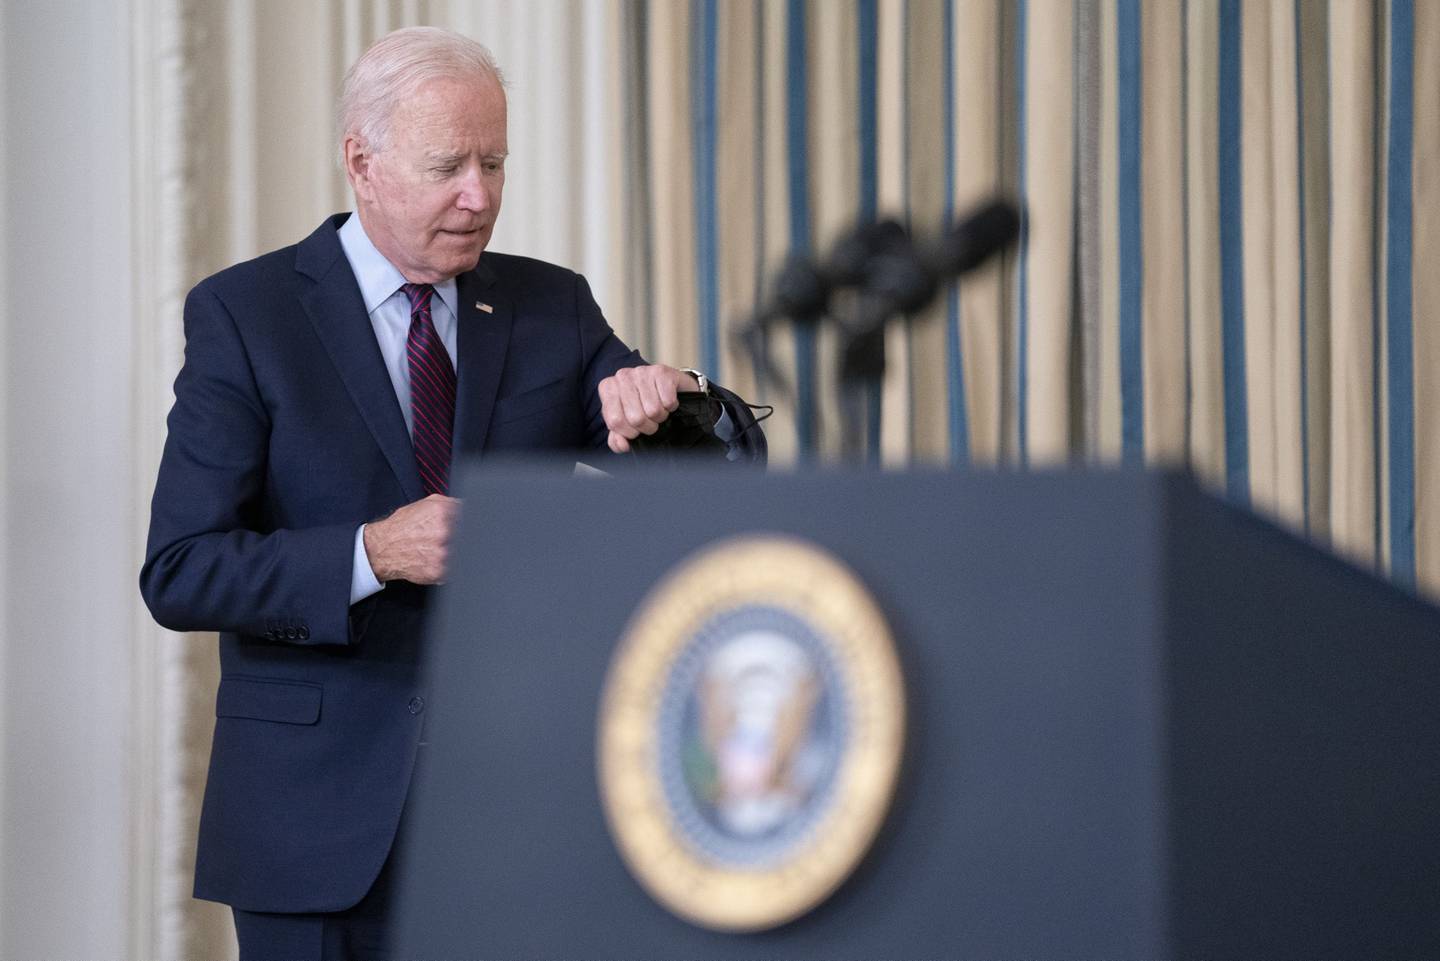 U.S. President Joe Biden checks his watch while arriving to speak in the State Dining Room of the White House in Washington, D.C., U.S., on Monday, Oct. 4, 2021. The U.S. is moving closer to its first-ever default, with neither political party in Washington yet signaling it's ready to back down from a partisan showdown on the federal debt limit. Photographer: Stefani Reynolds/Bloomberg 